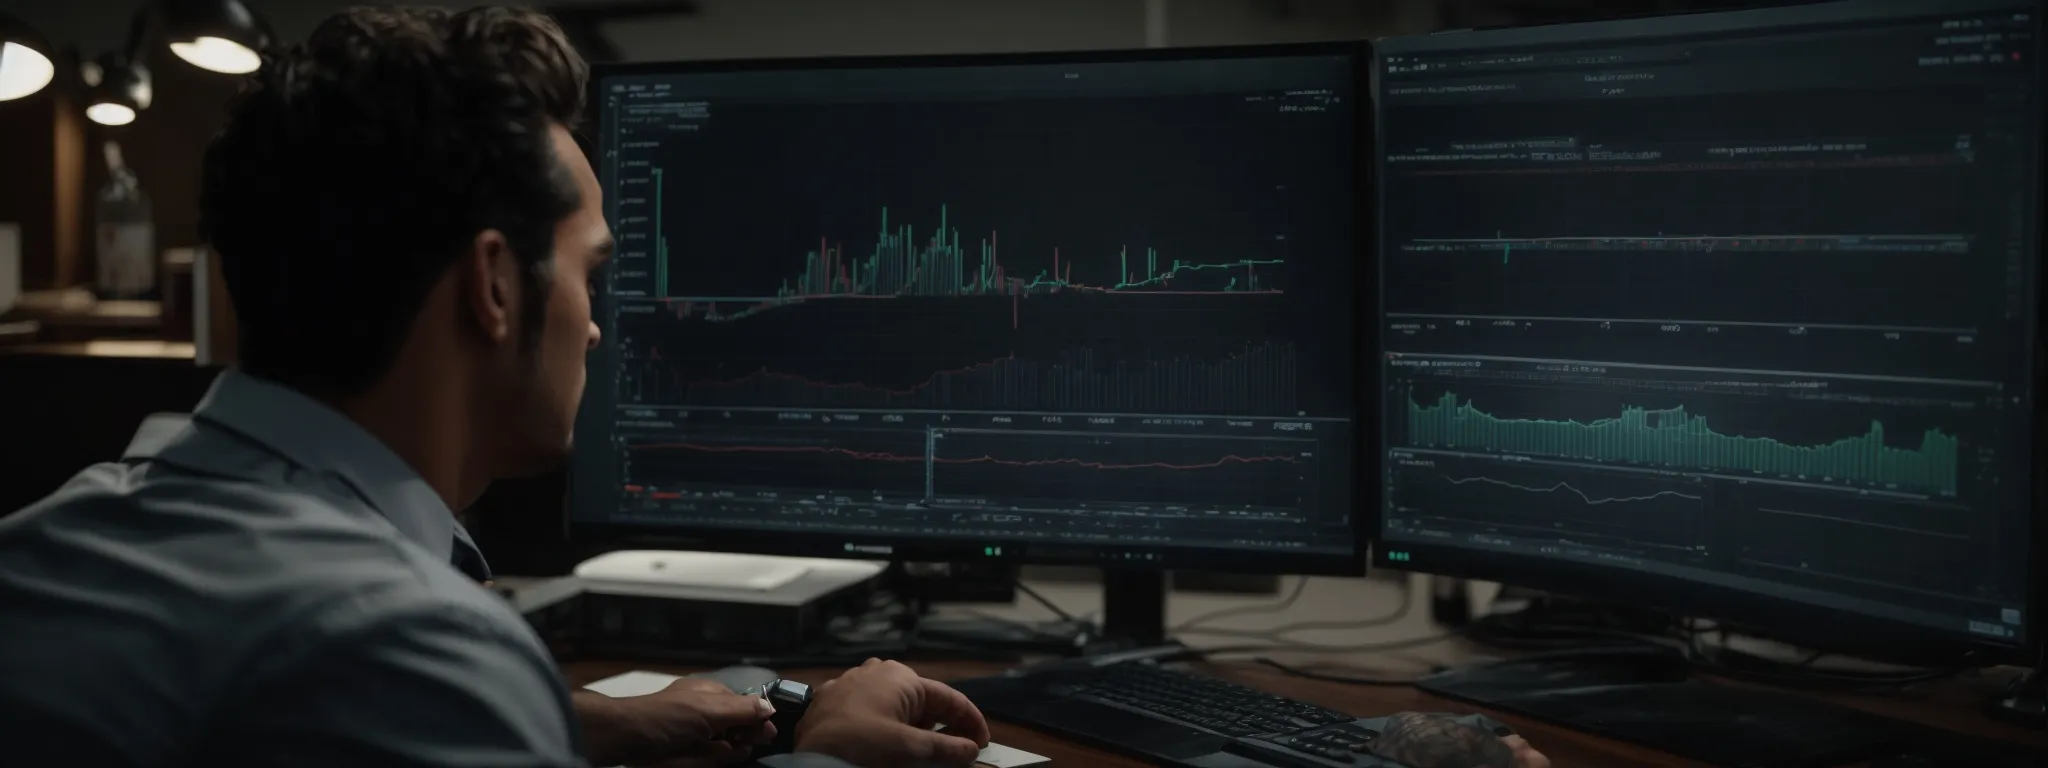 a focused individual analyzes graphs on a computer screen, indicating seo performance metrics.